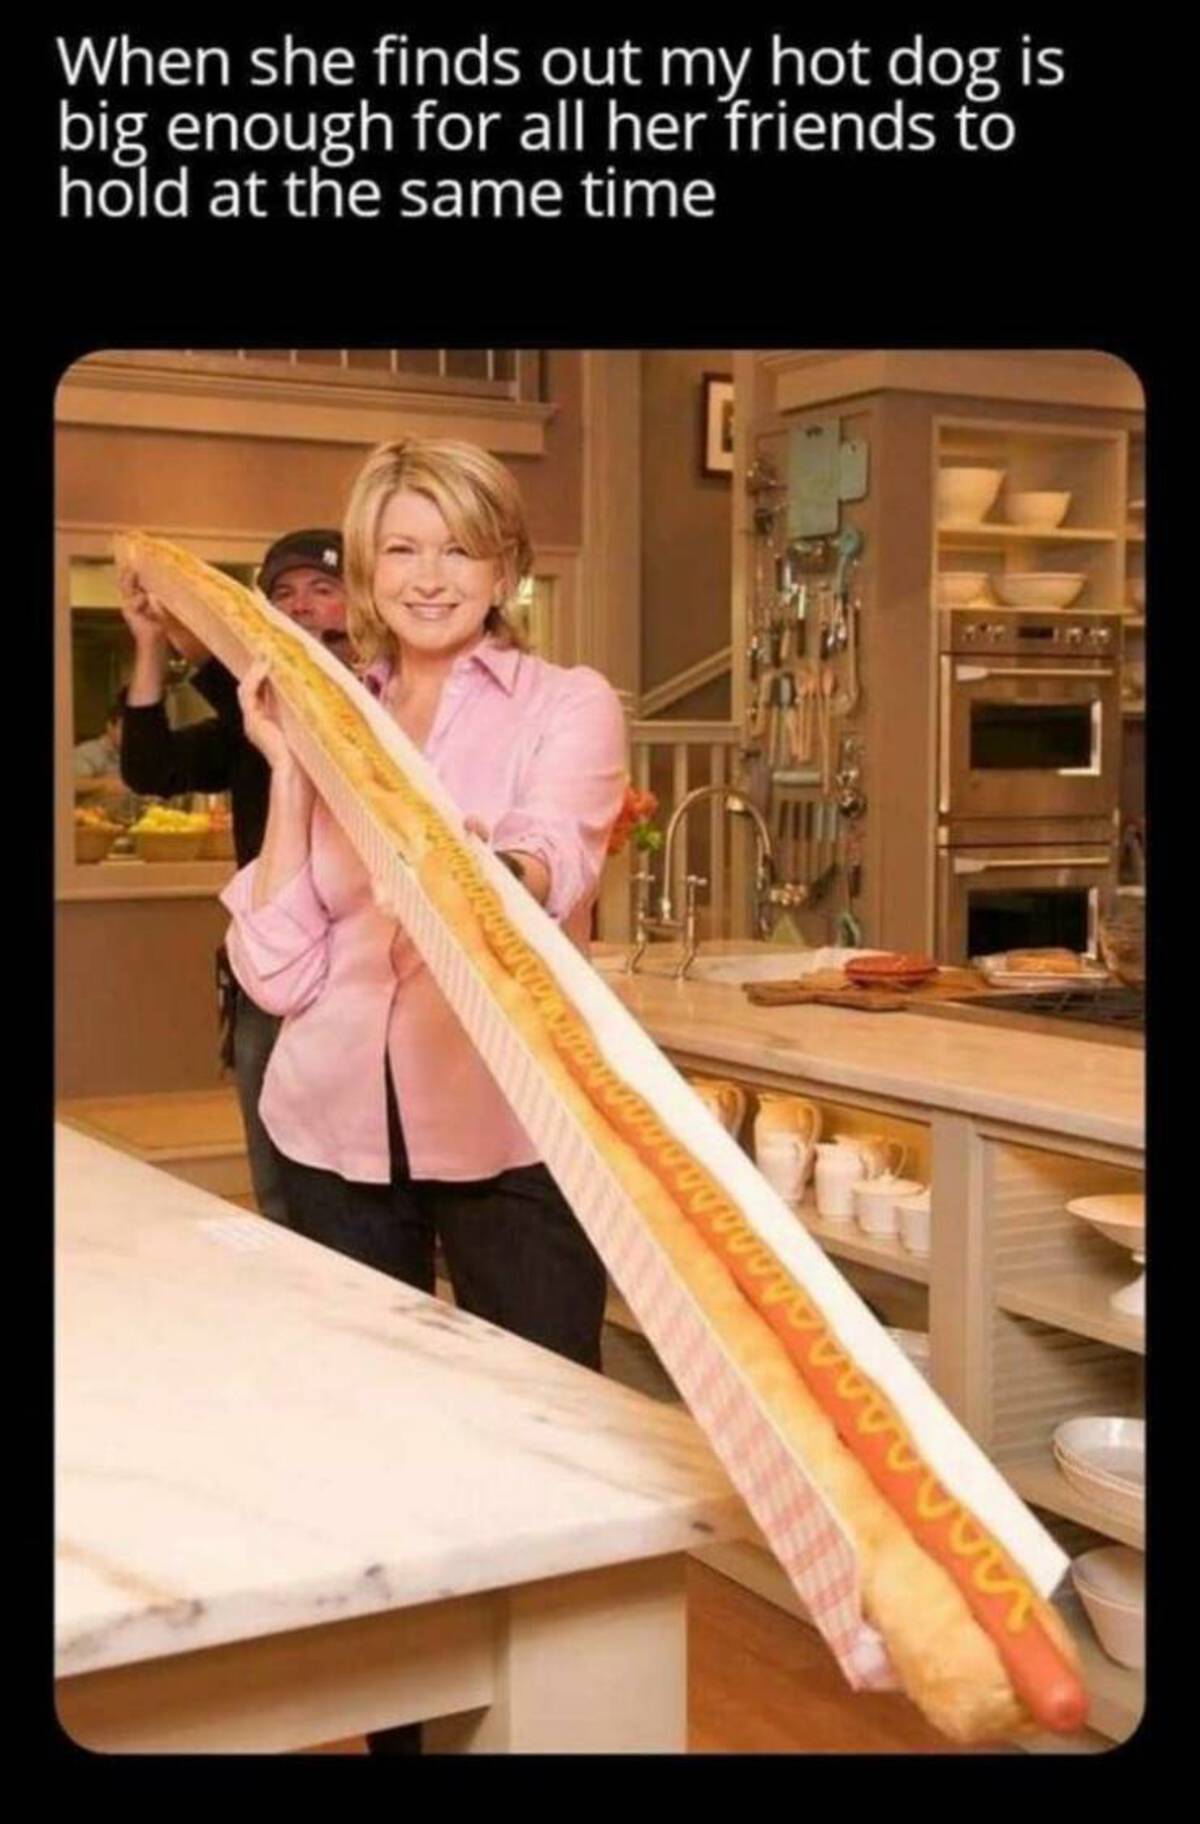 martha stewart with hot dog - When she finds out my hot dog is big enough for all her friends to hold at the same time wwwwwwwww